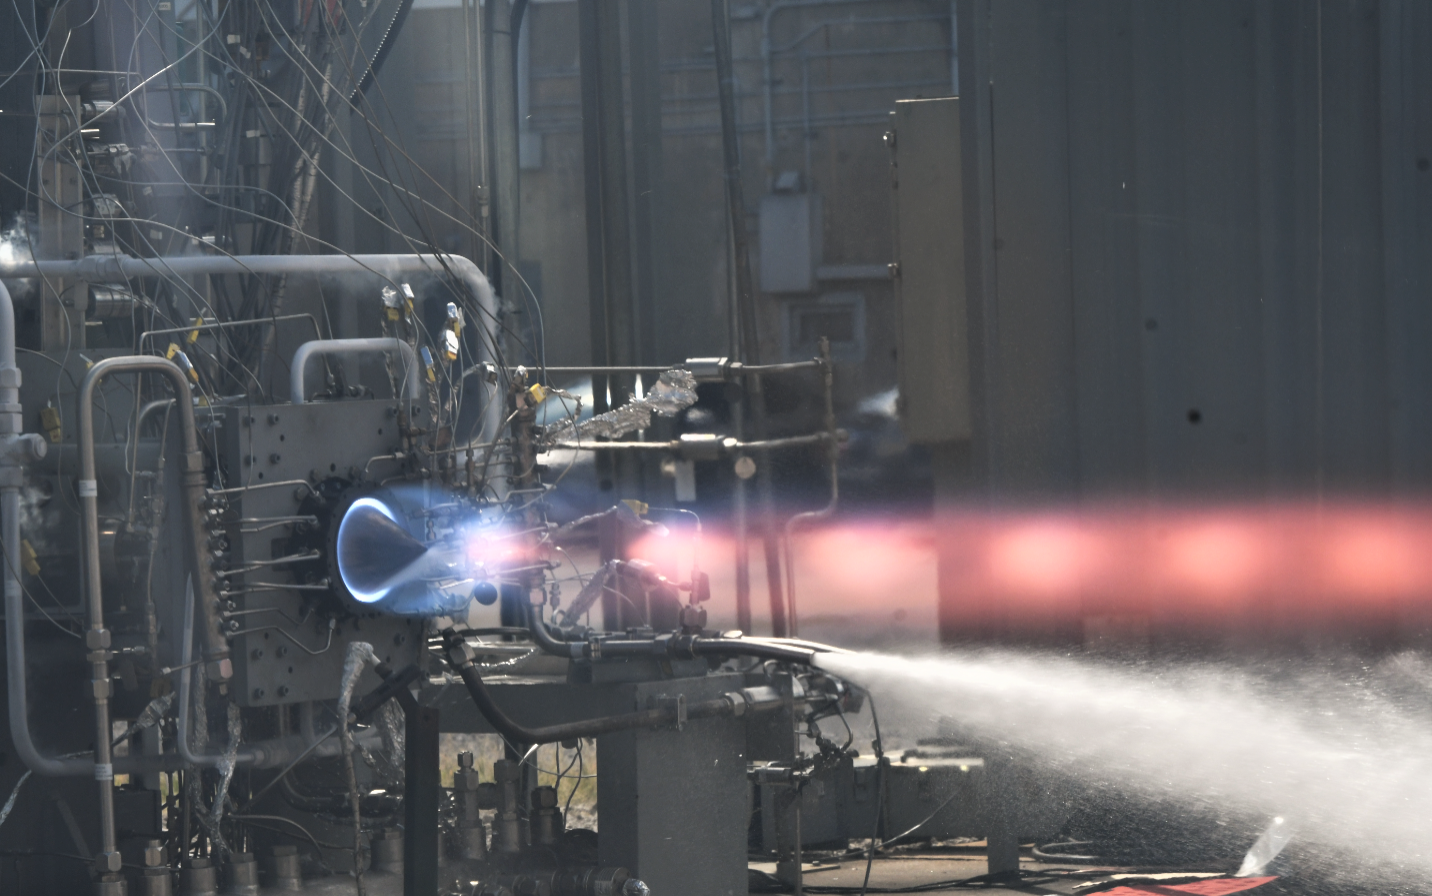 An engine test with a stream of blue to red flames.